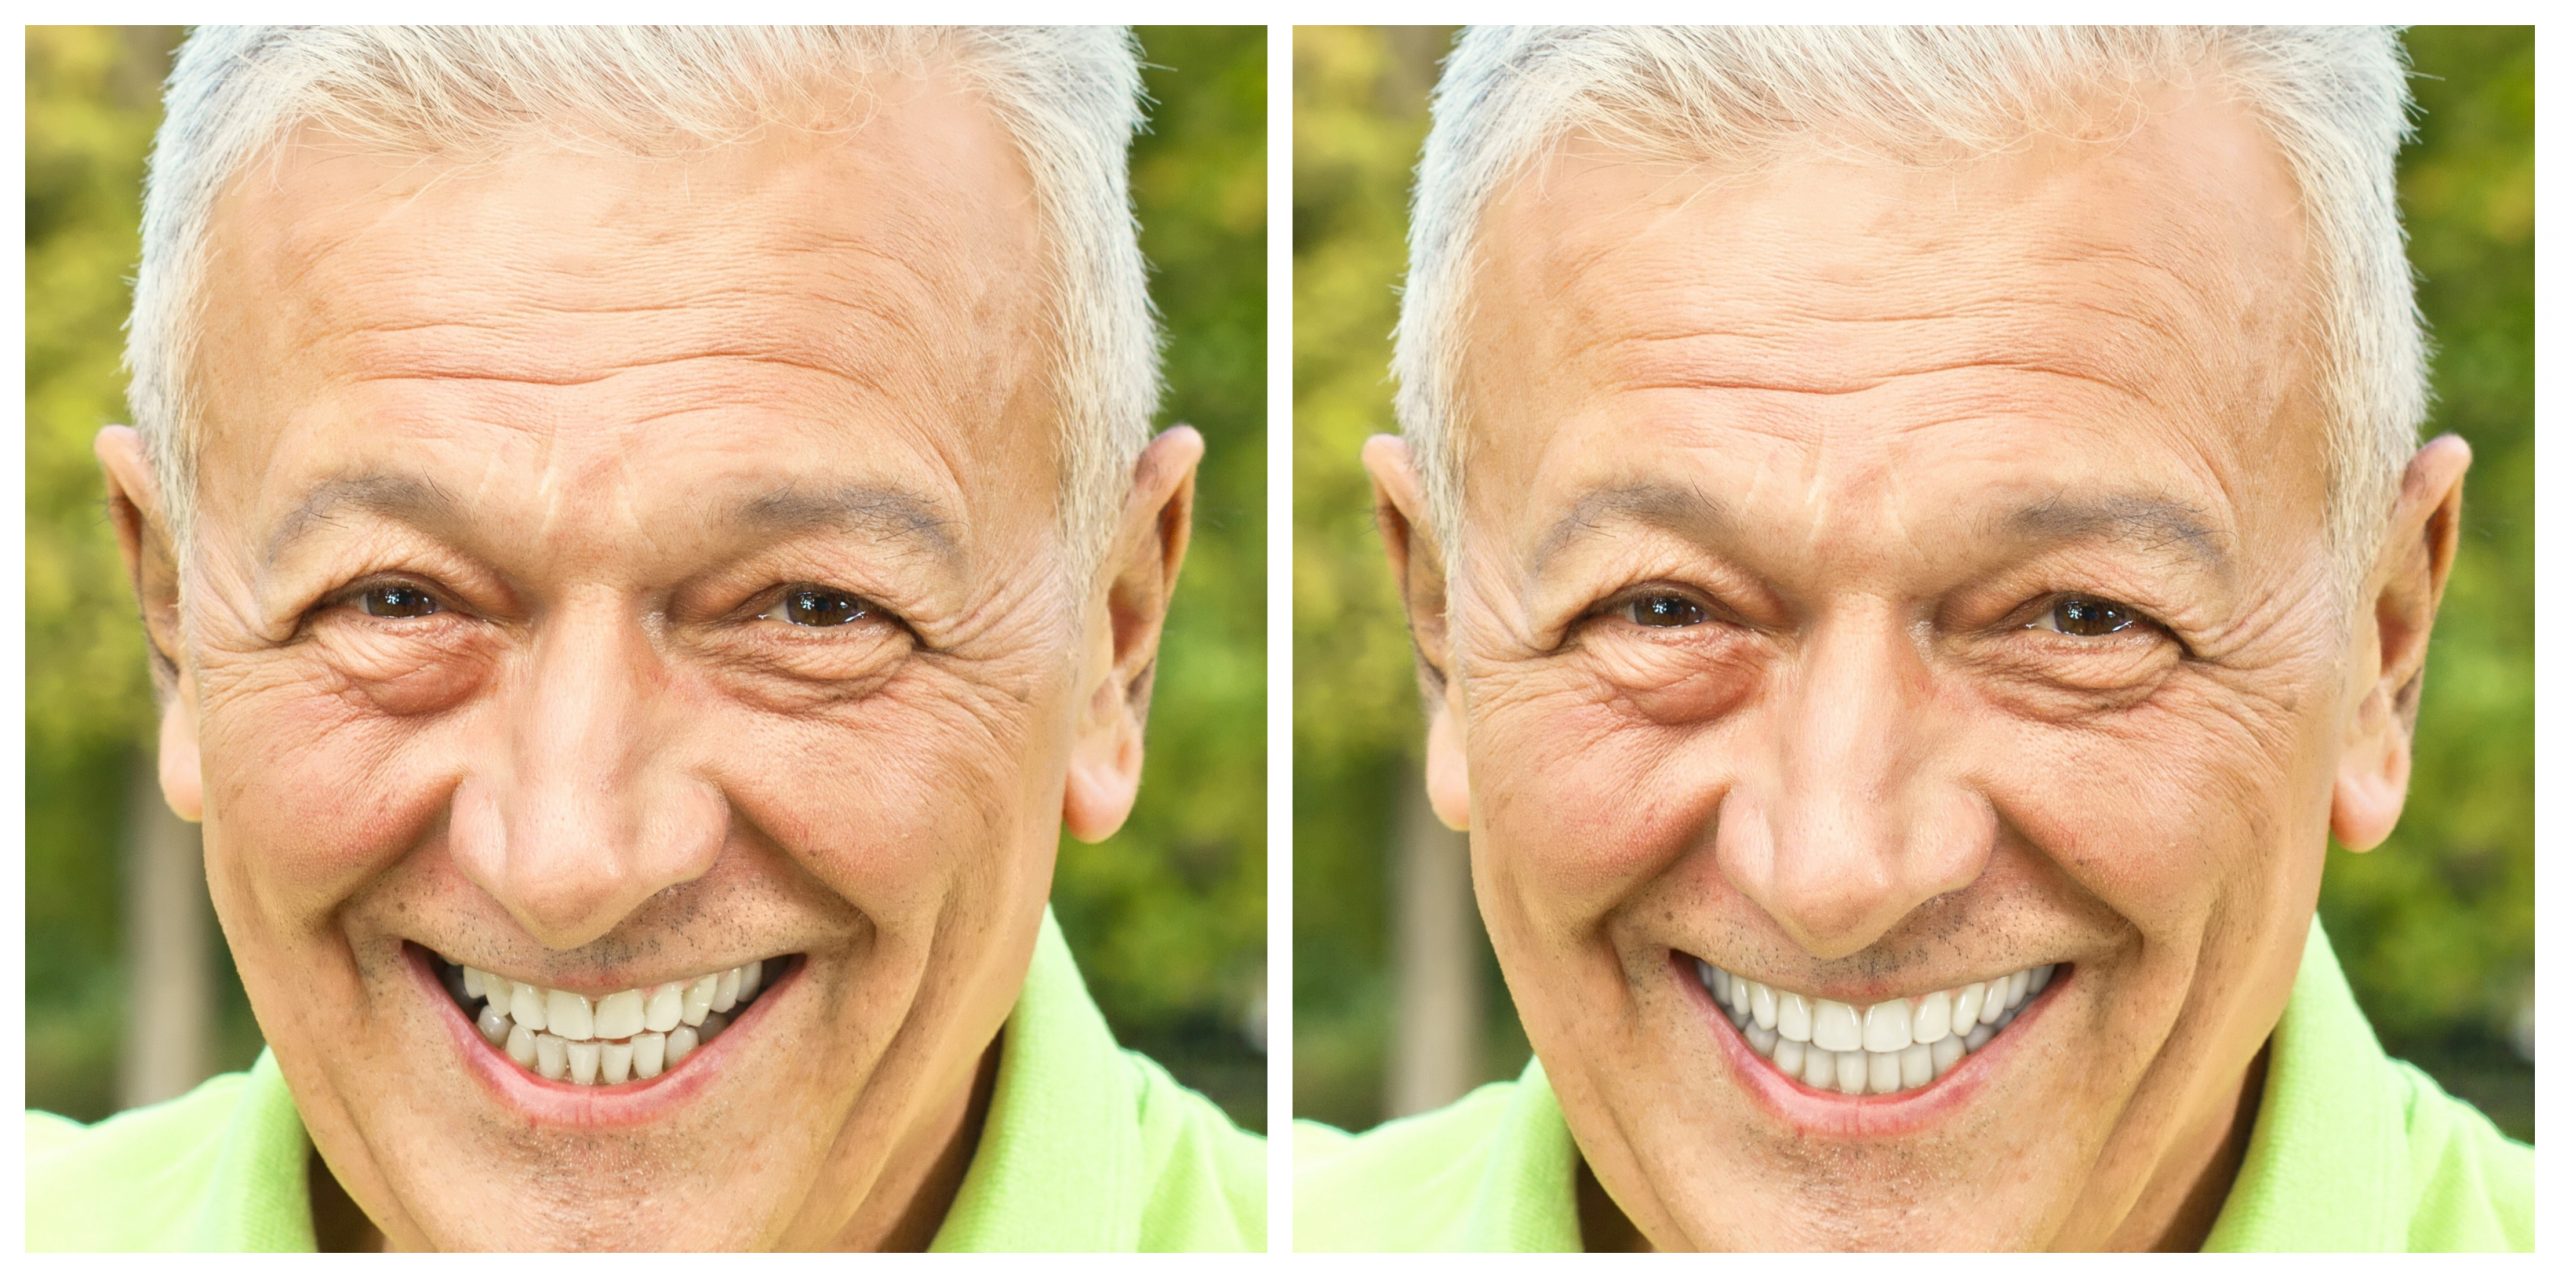 Smile Restoration - Before and After24